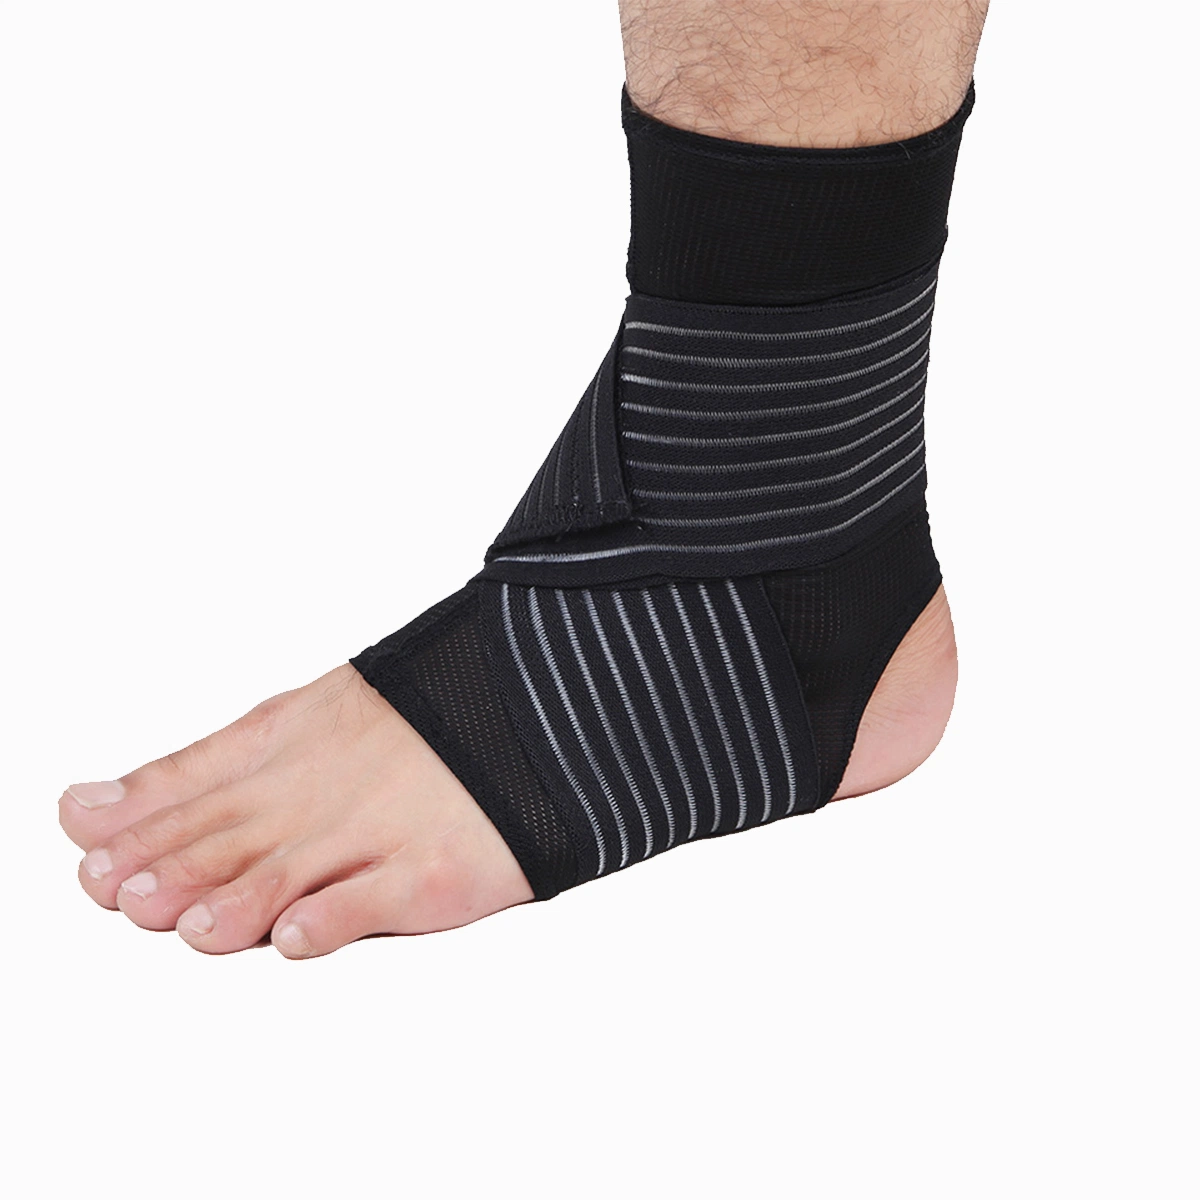 Rigorer Ankle Support Mesh Polyester Fabric Sports Wear Basketball safety Protective Gear Unisex